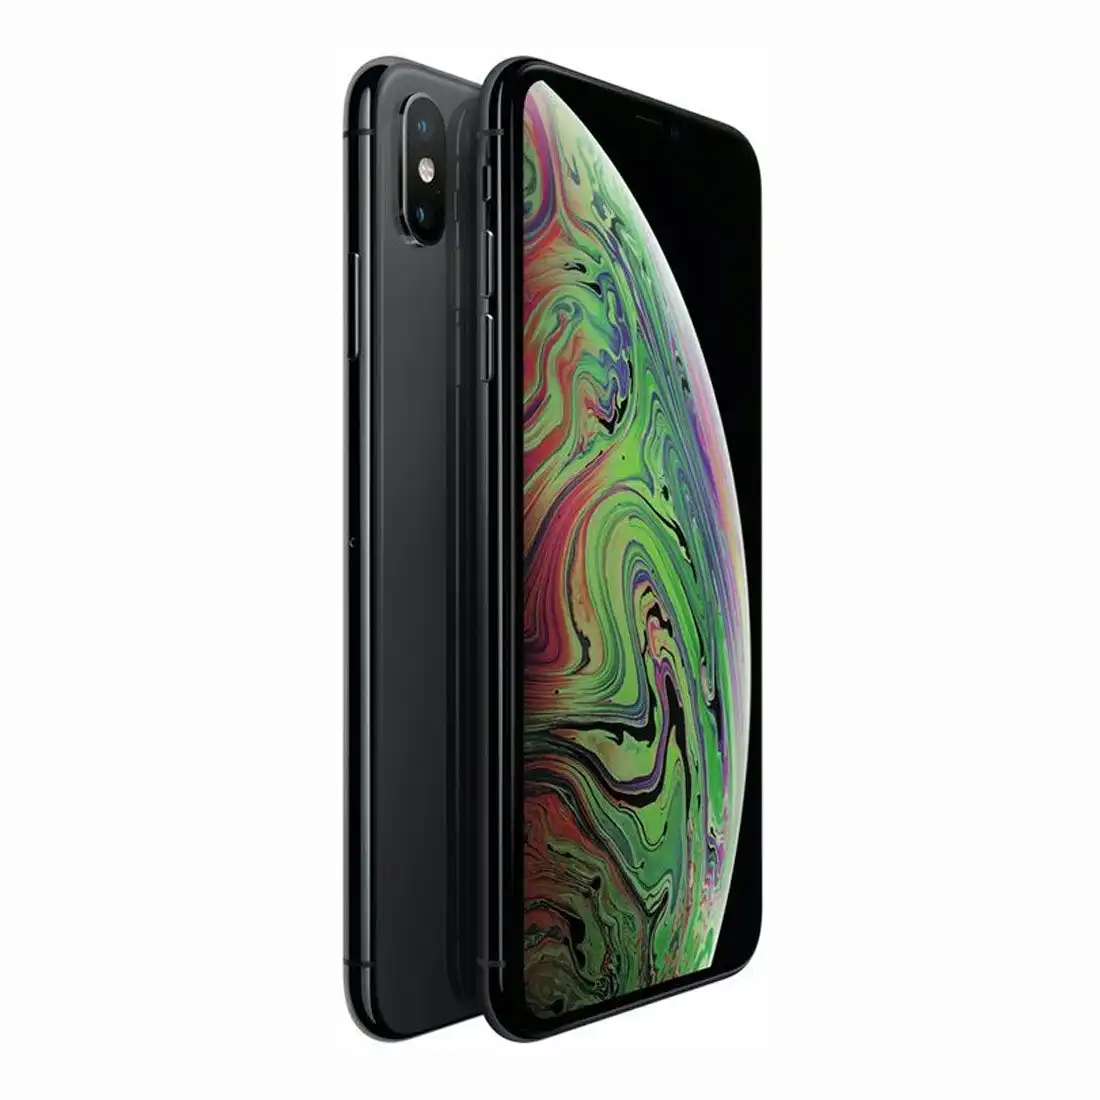 Apple iPhone XS Max 512GB - Space Grey [Refurbished] - As New